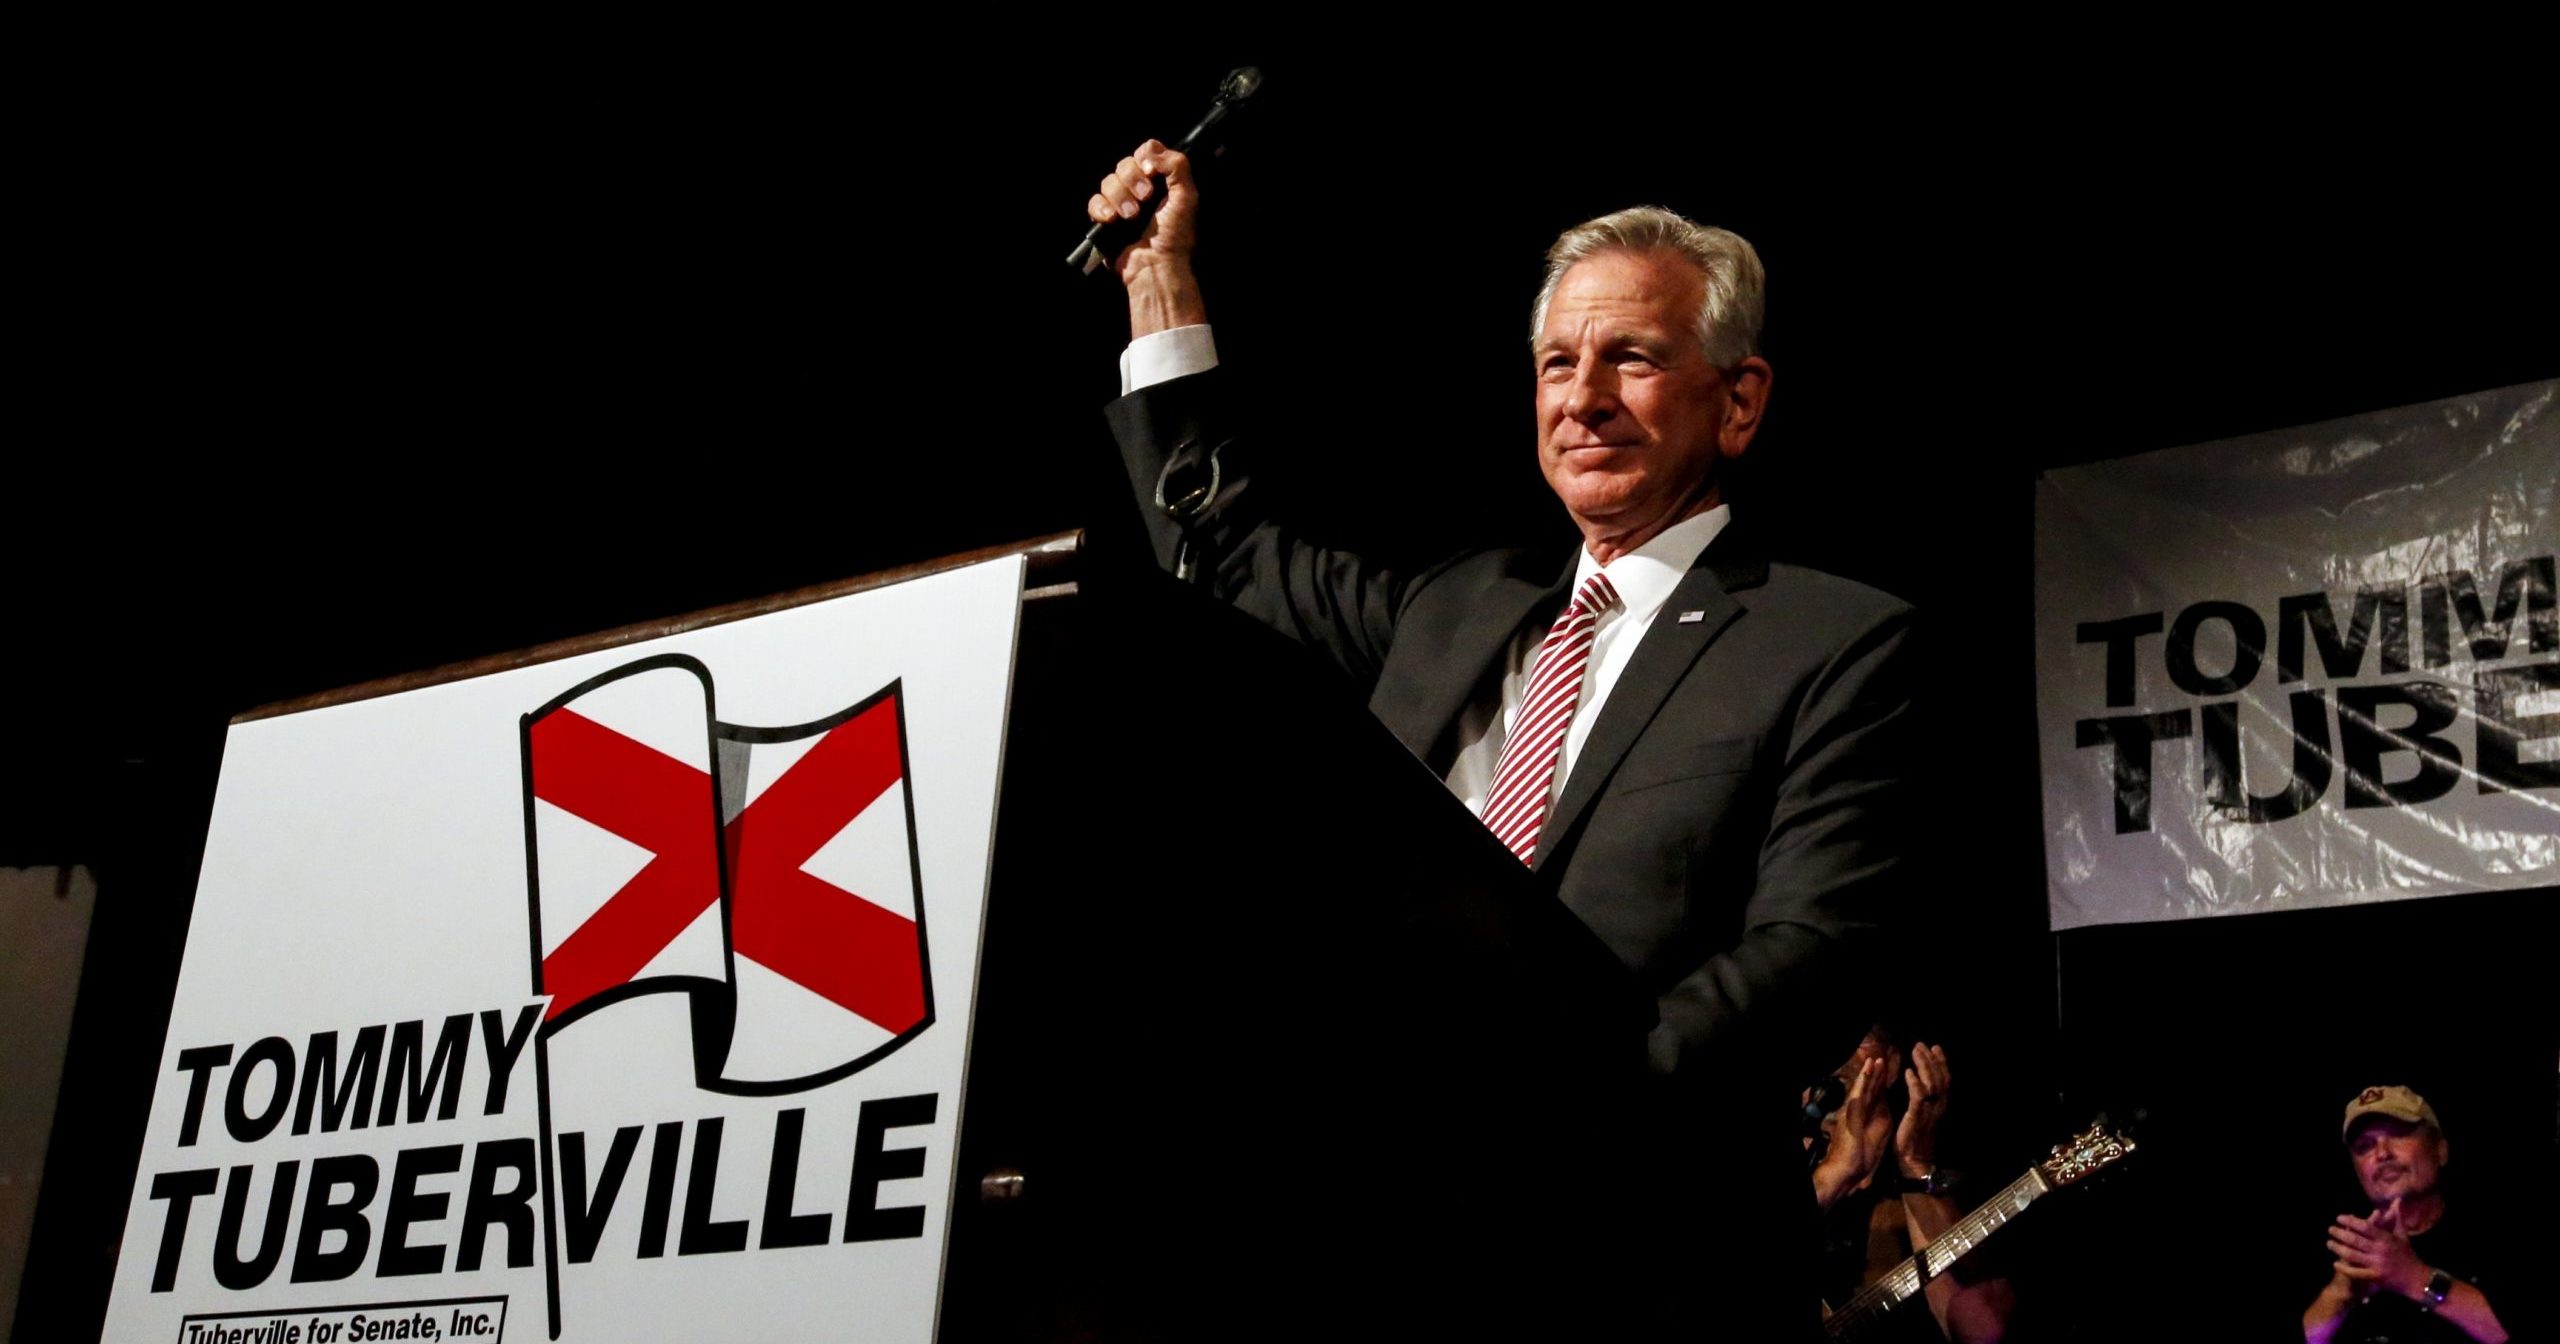 In this July 14, 2020, file photo, US Senate candidate Tommy Tuberville speaks to supporters after defeating Jeff Sessions in a runoff election in Montgomery, Alabama.